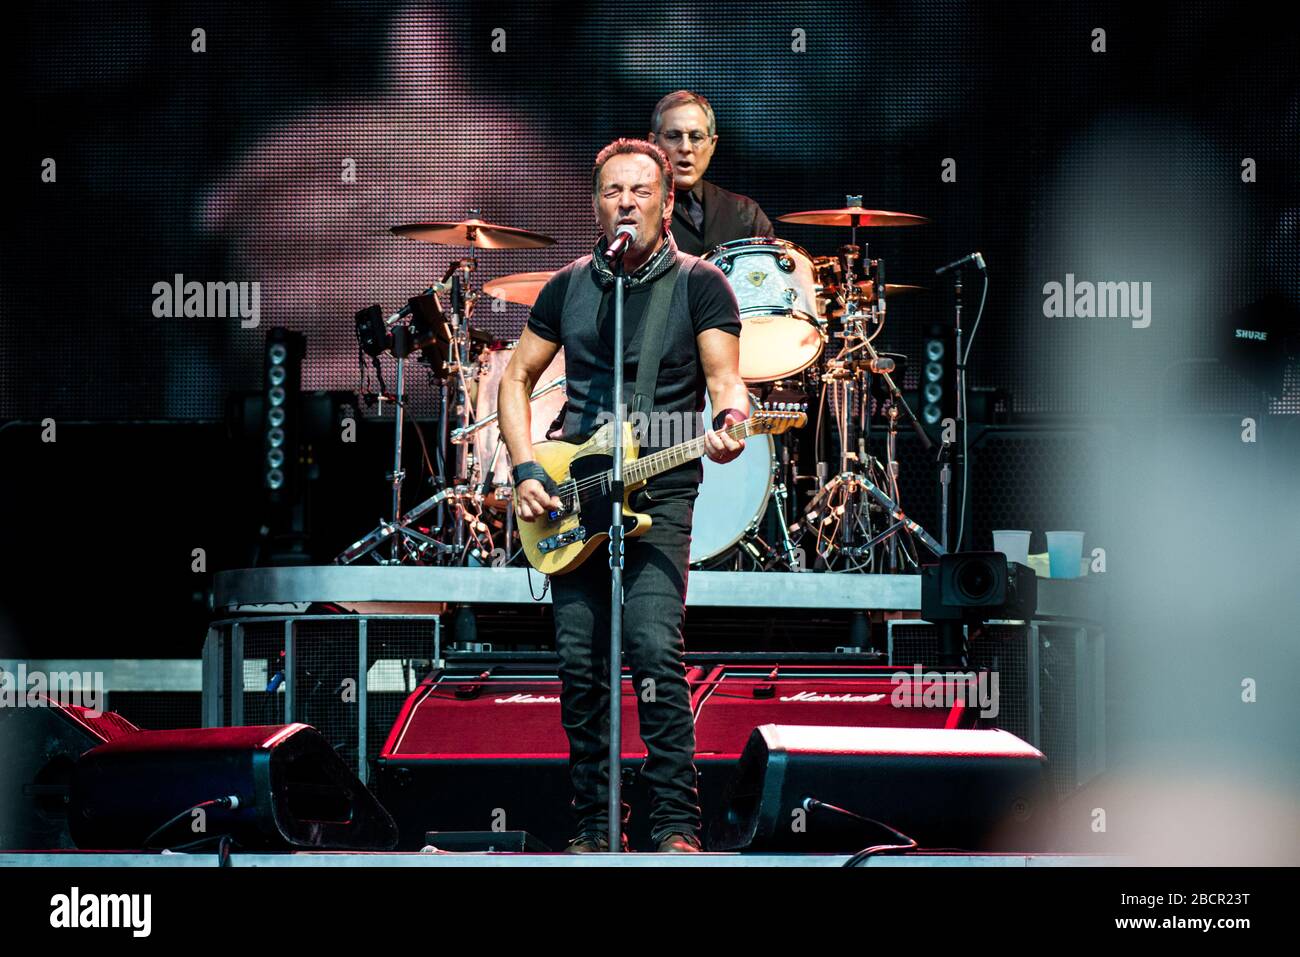 The American singer and composer Bruce Springsteen, together with the E-Street band, playing for the “The River tour” at the San Siro Stadium in Milan Stock Photo